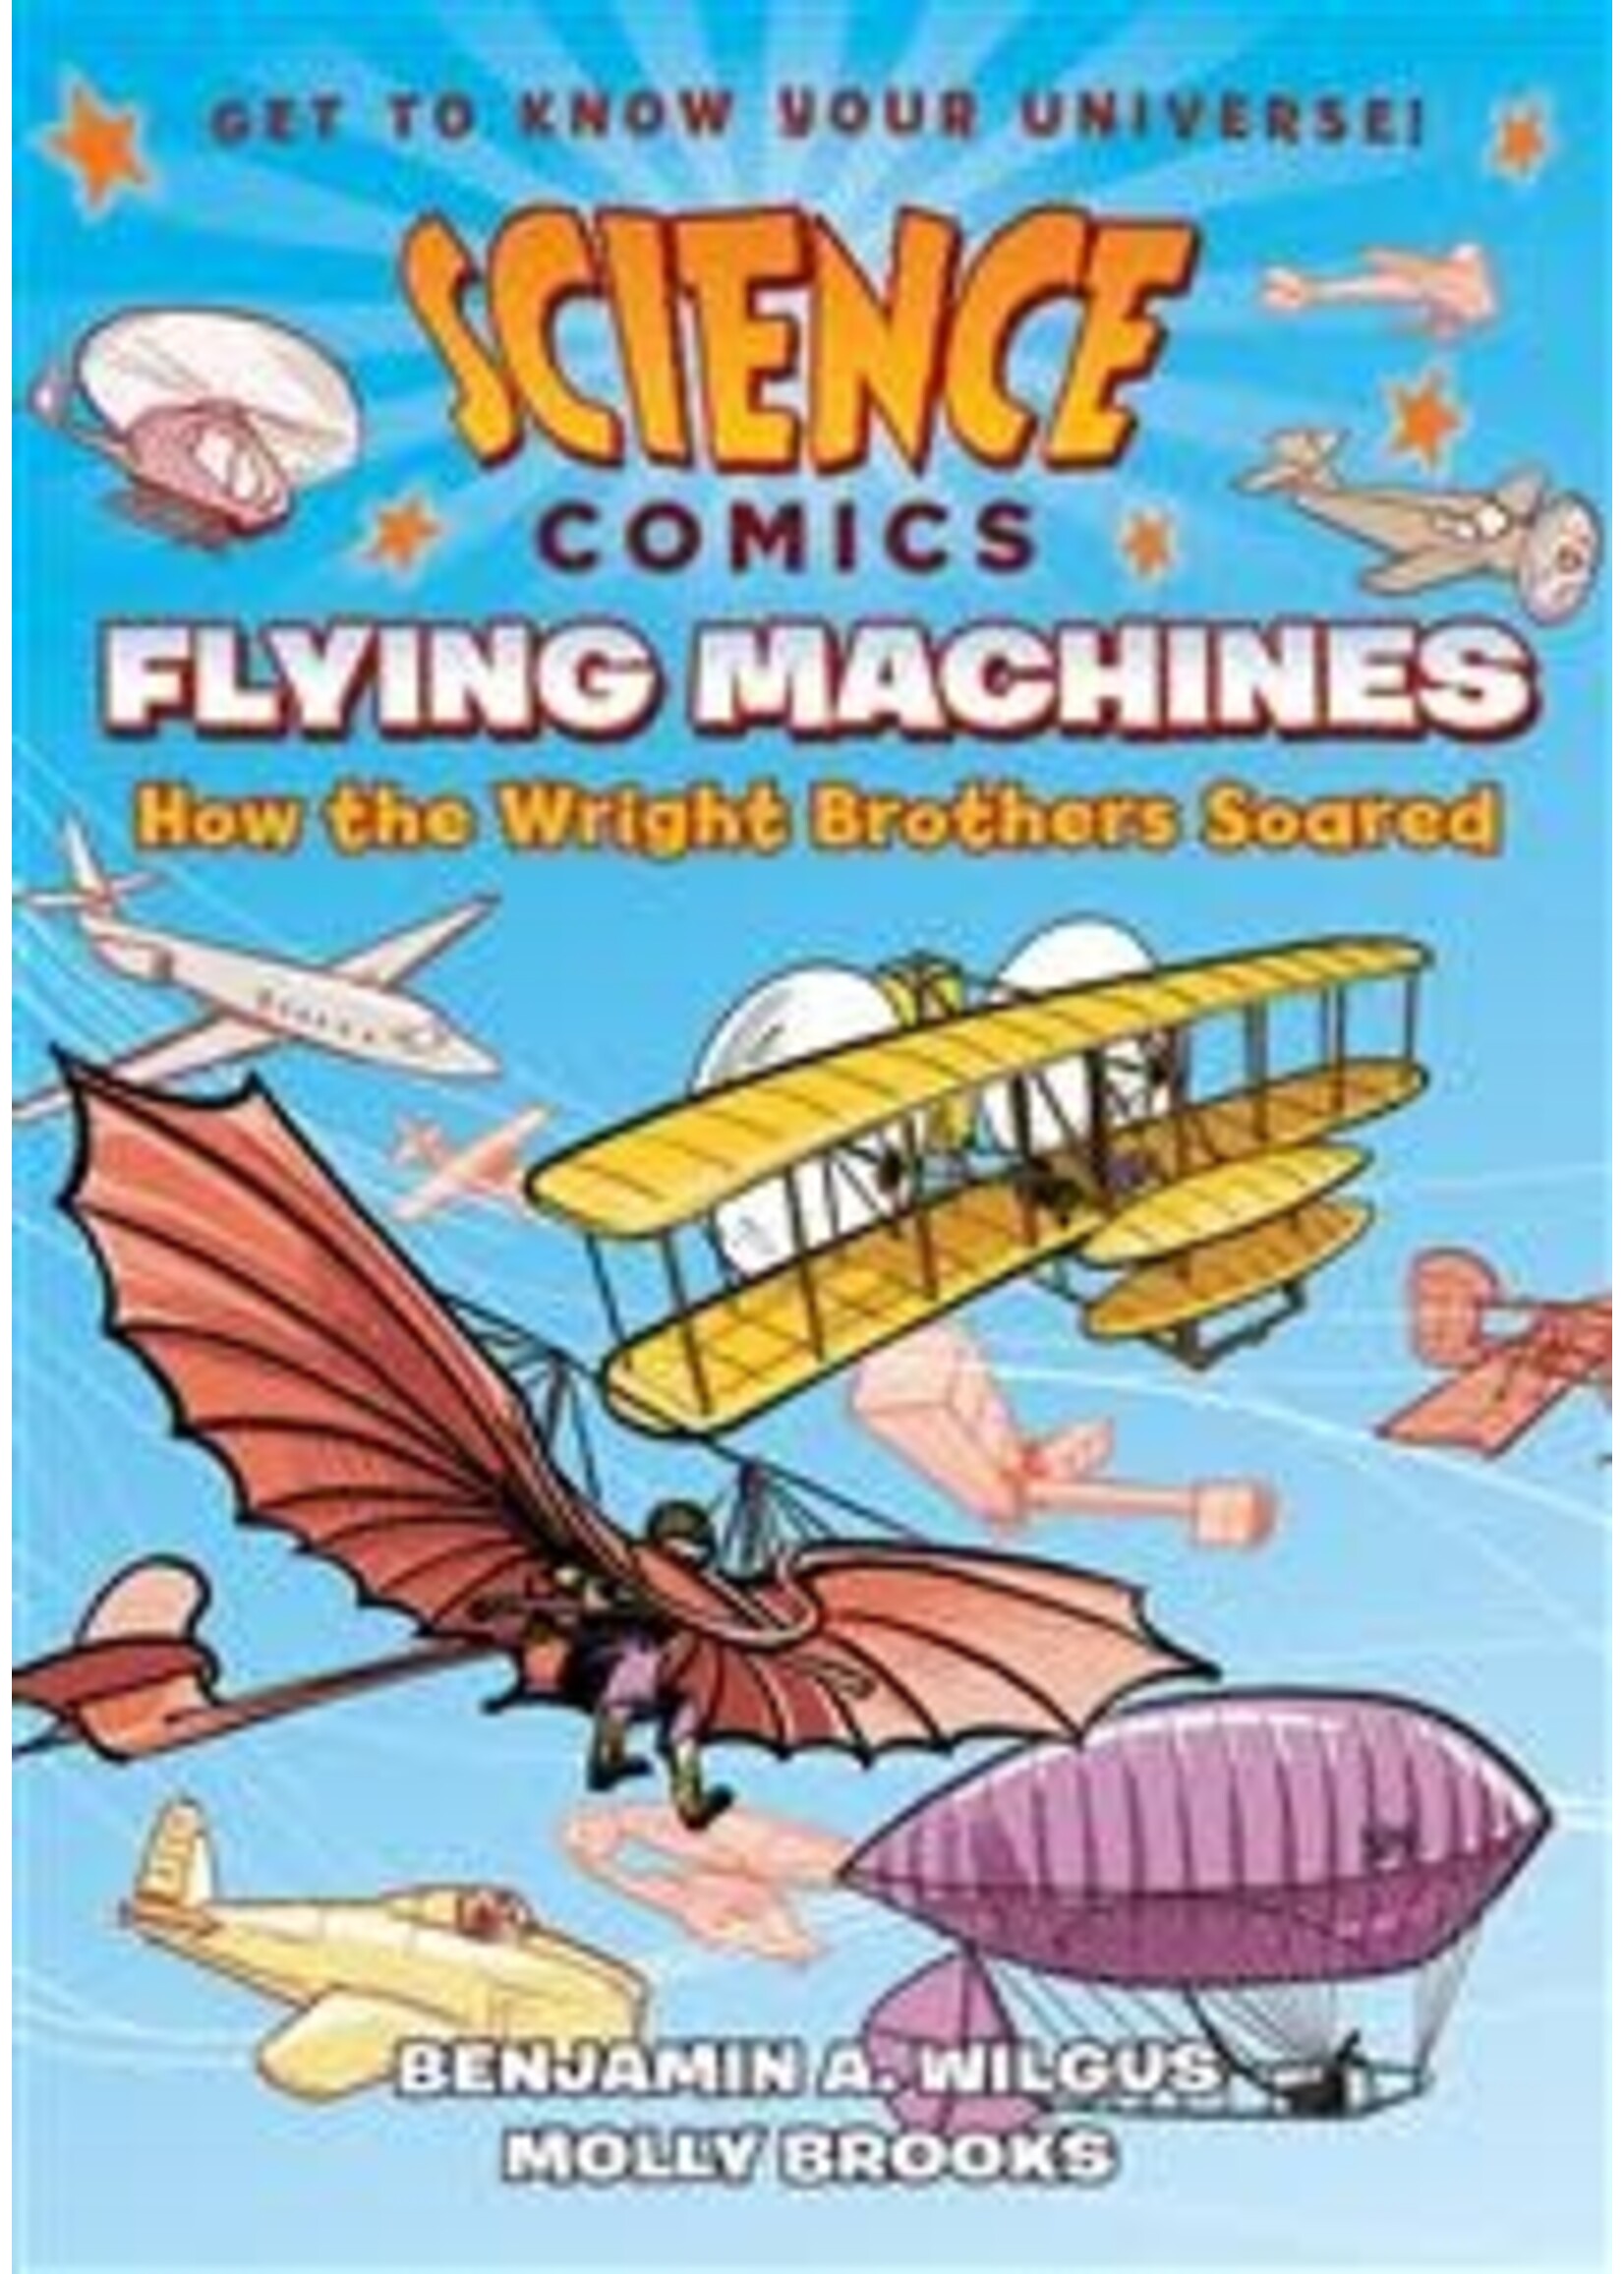 Science Comics: Flying Machines - How the Wright Brothers Soared by Benjamin A. Wilgus, Molly Brooks